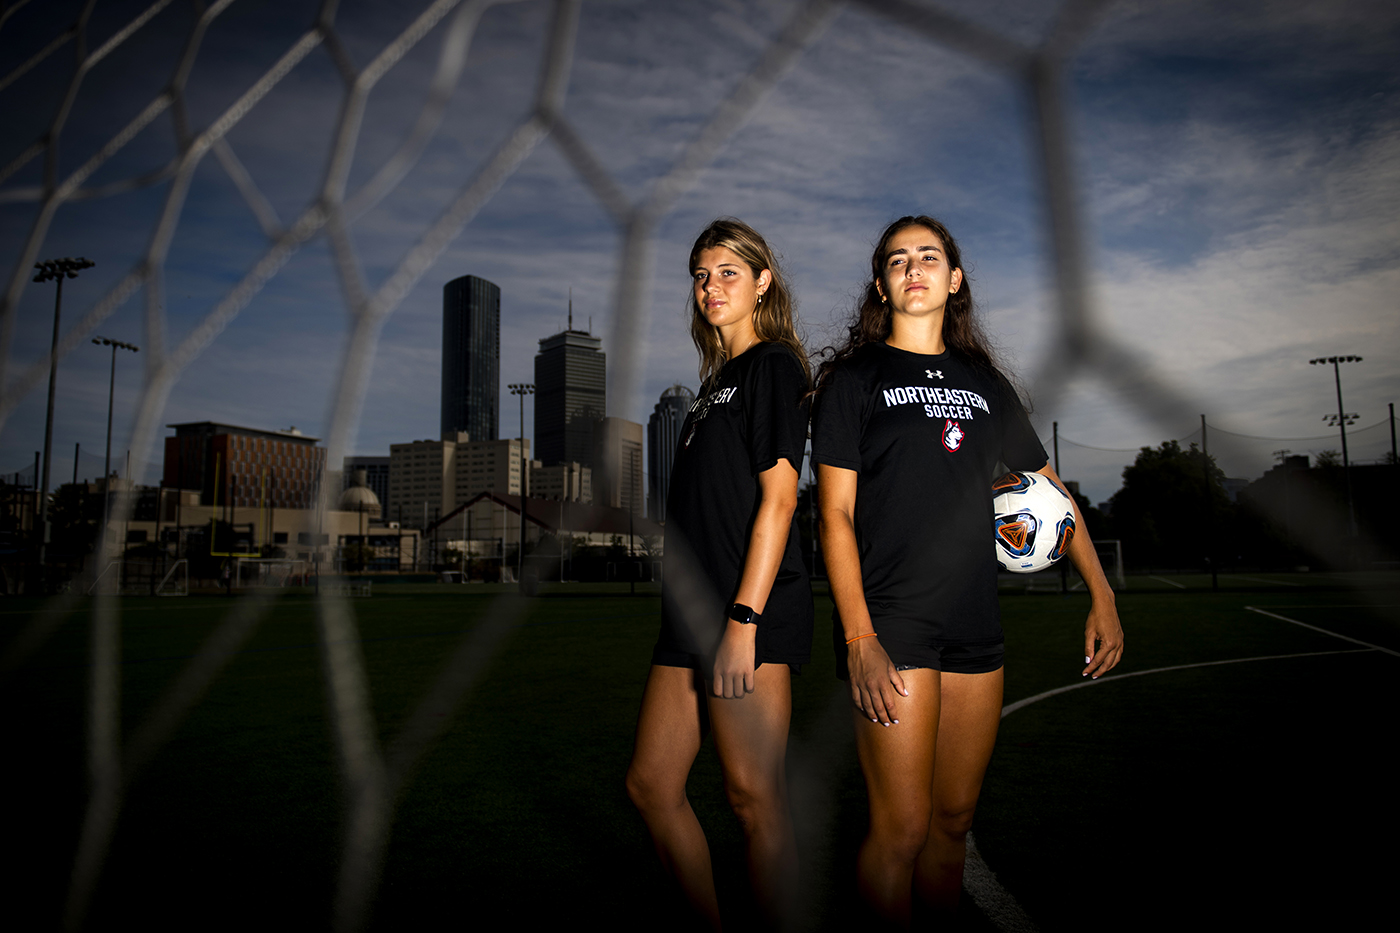 Two soccer players pose against a Boston skyline backdrop.